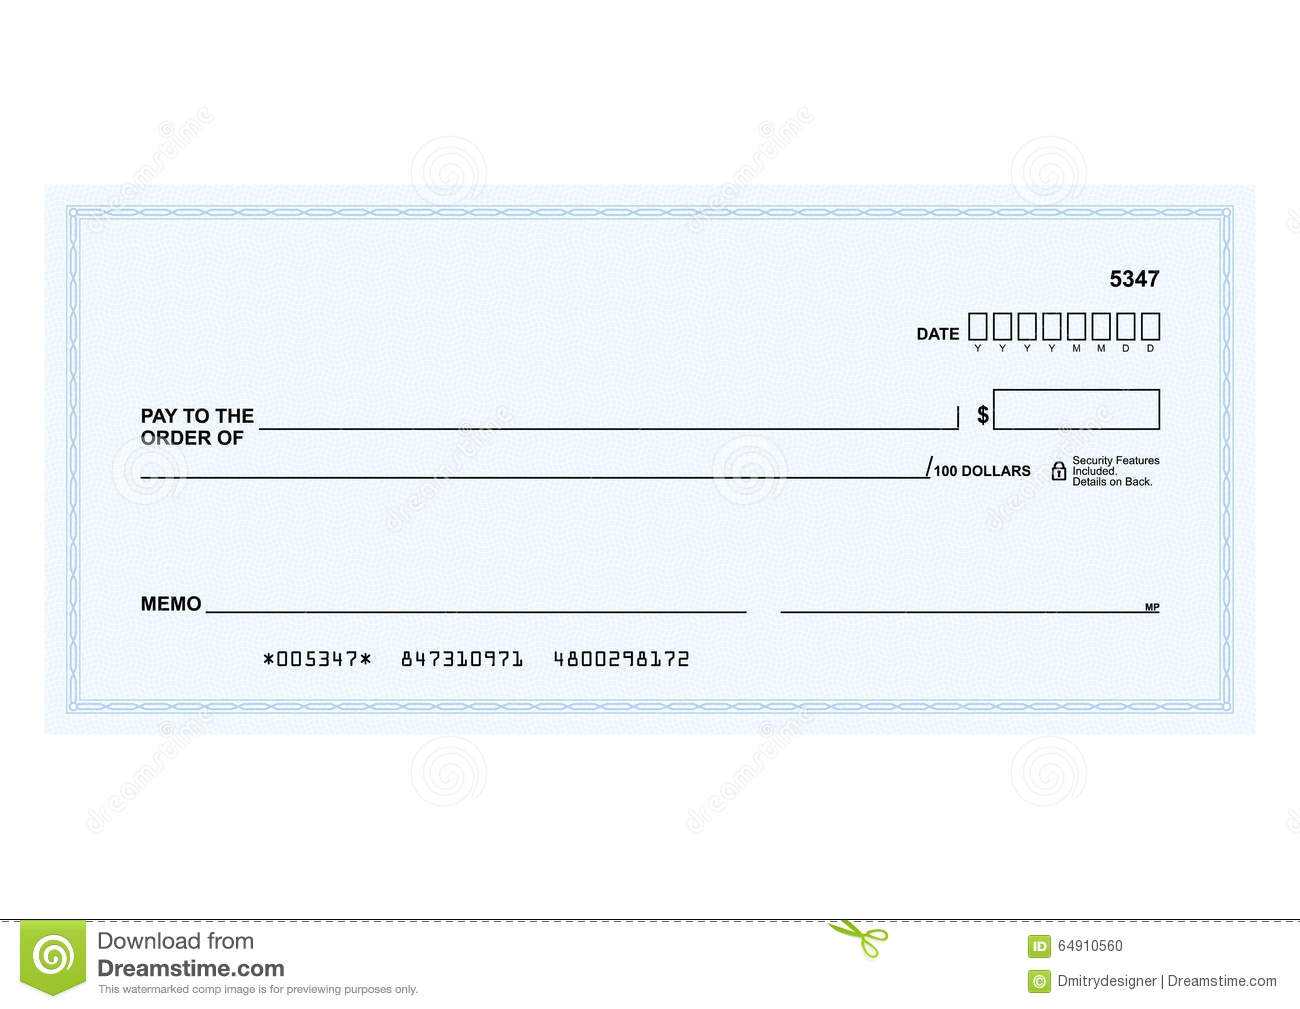 Blank Business Check Template. Business Reference Form Pnc With Blank Business Check Template